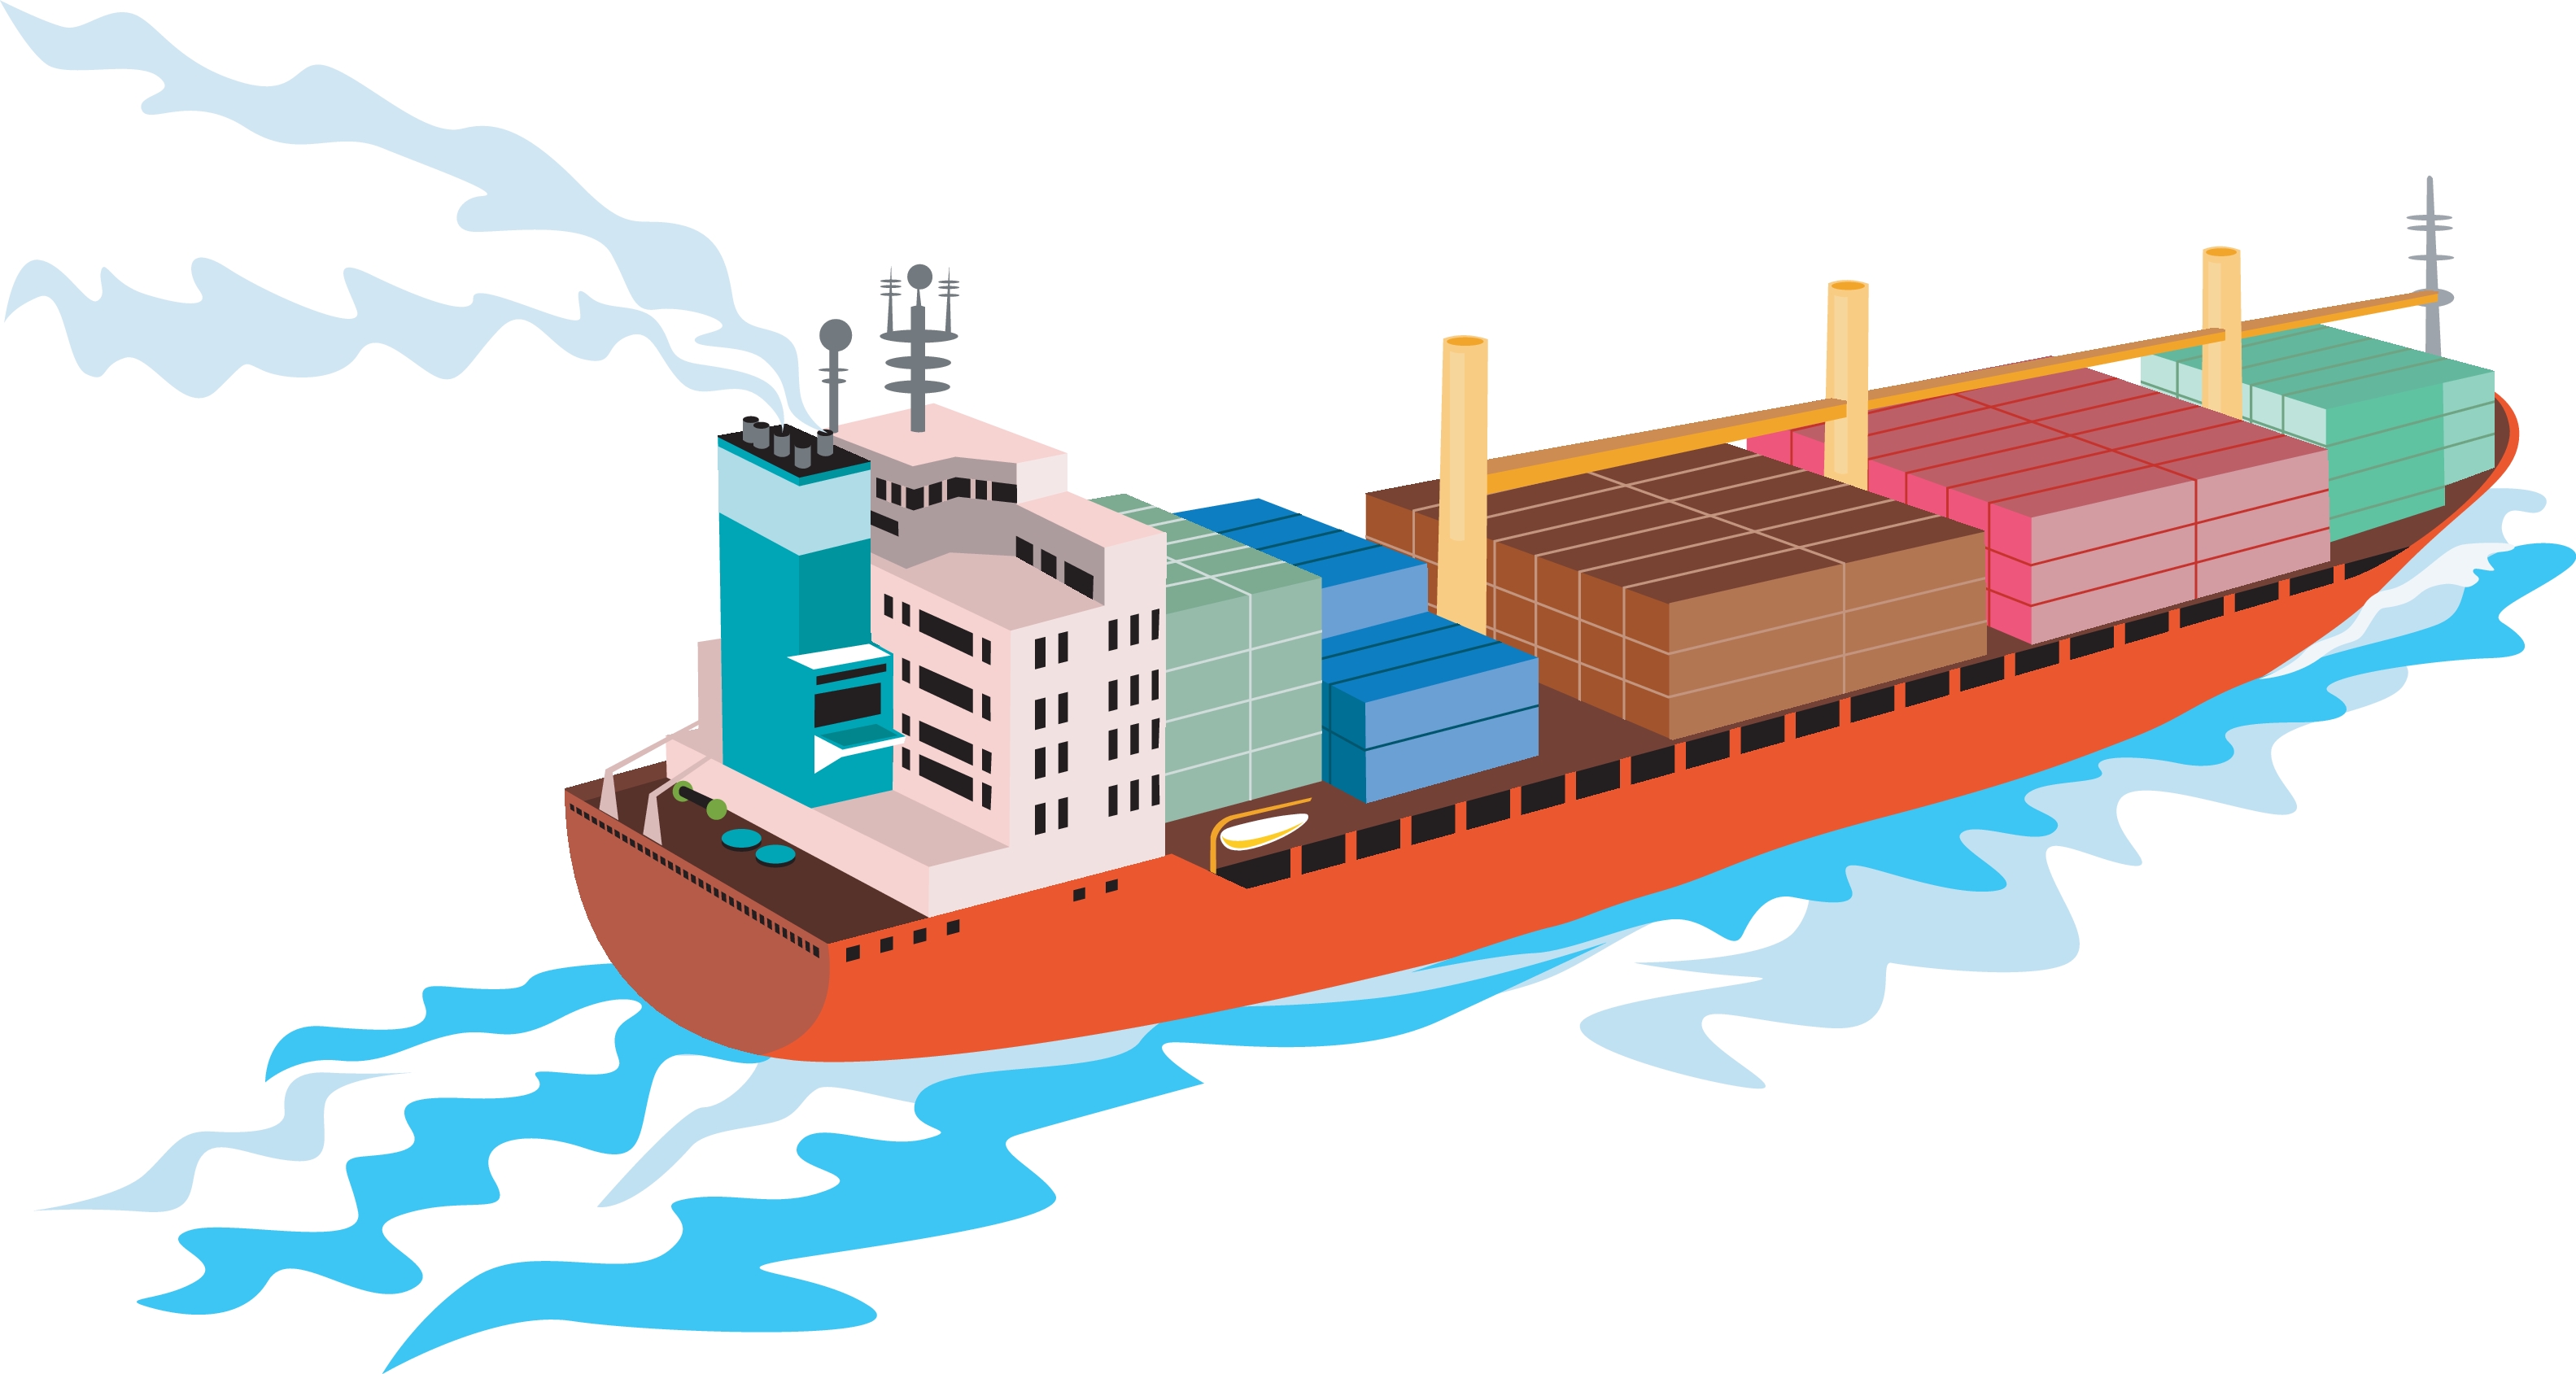 Creating eco-engines for sustainable shipping | News | University of Bergen